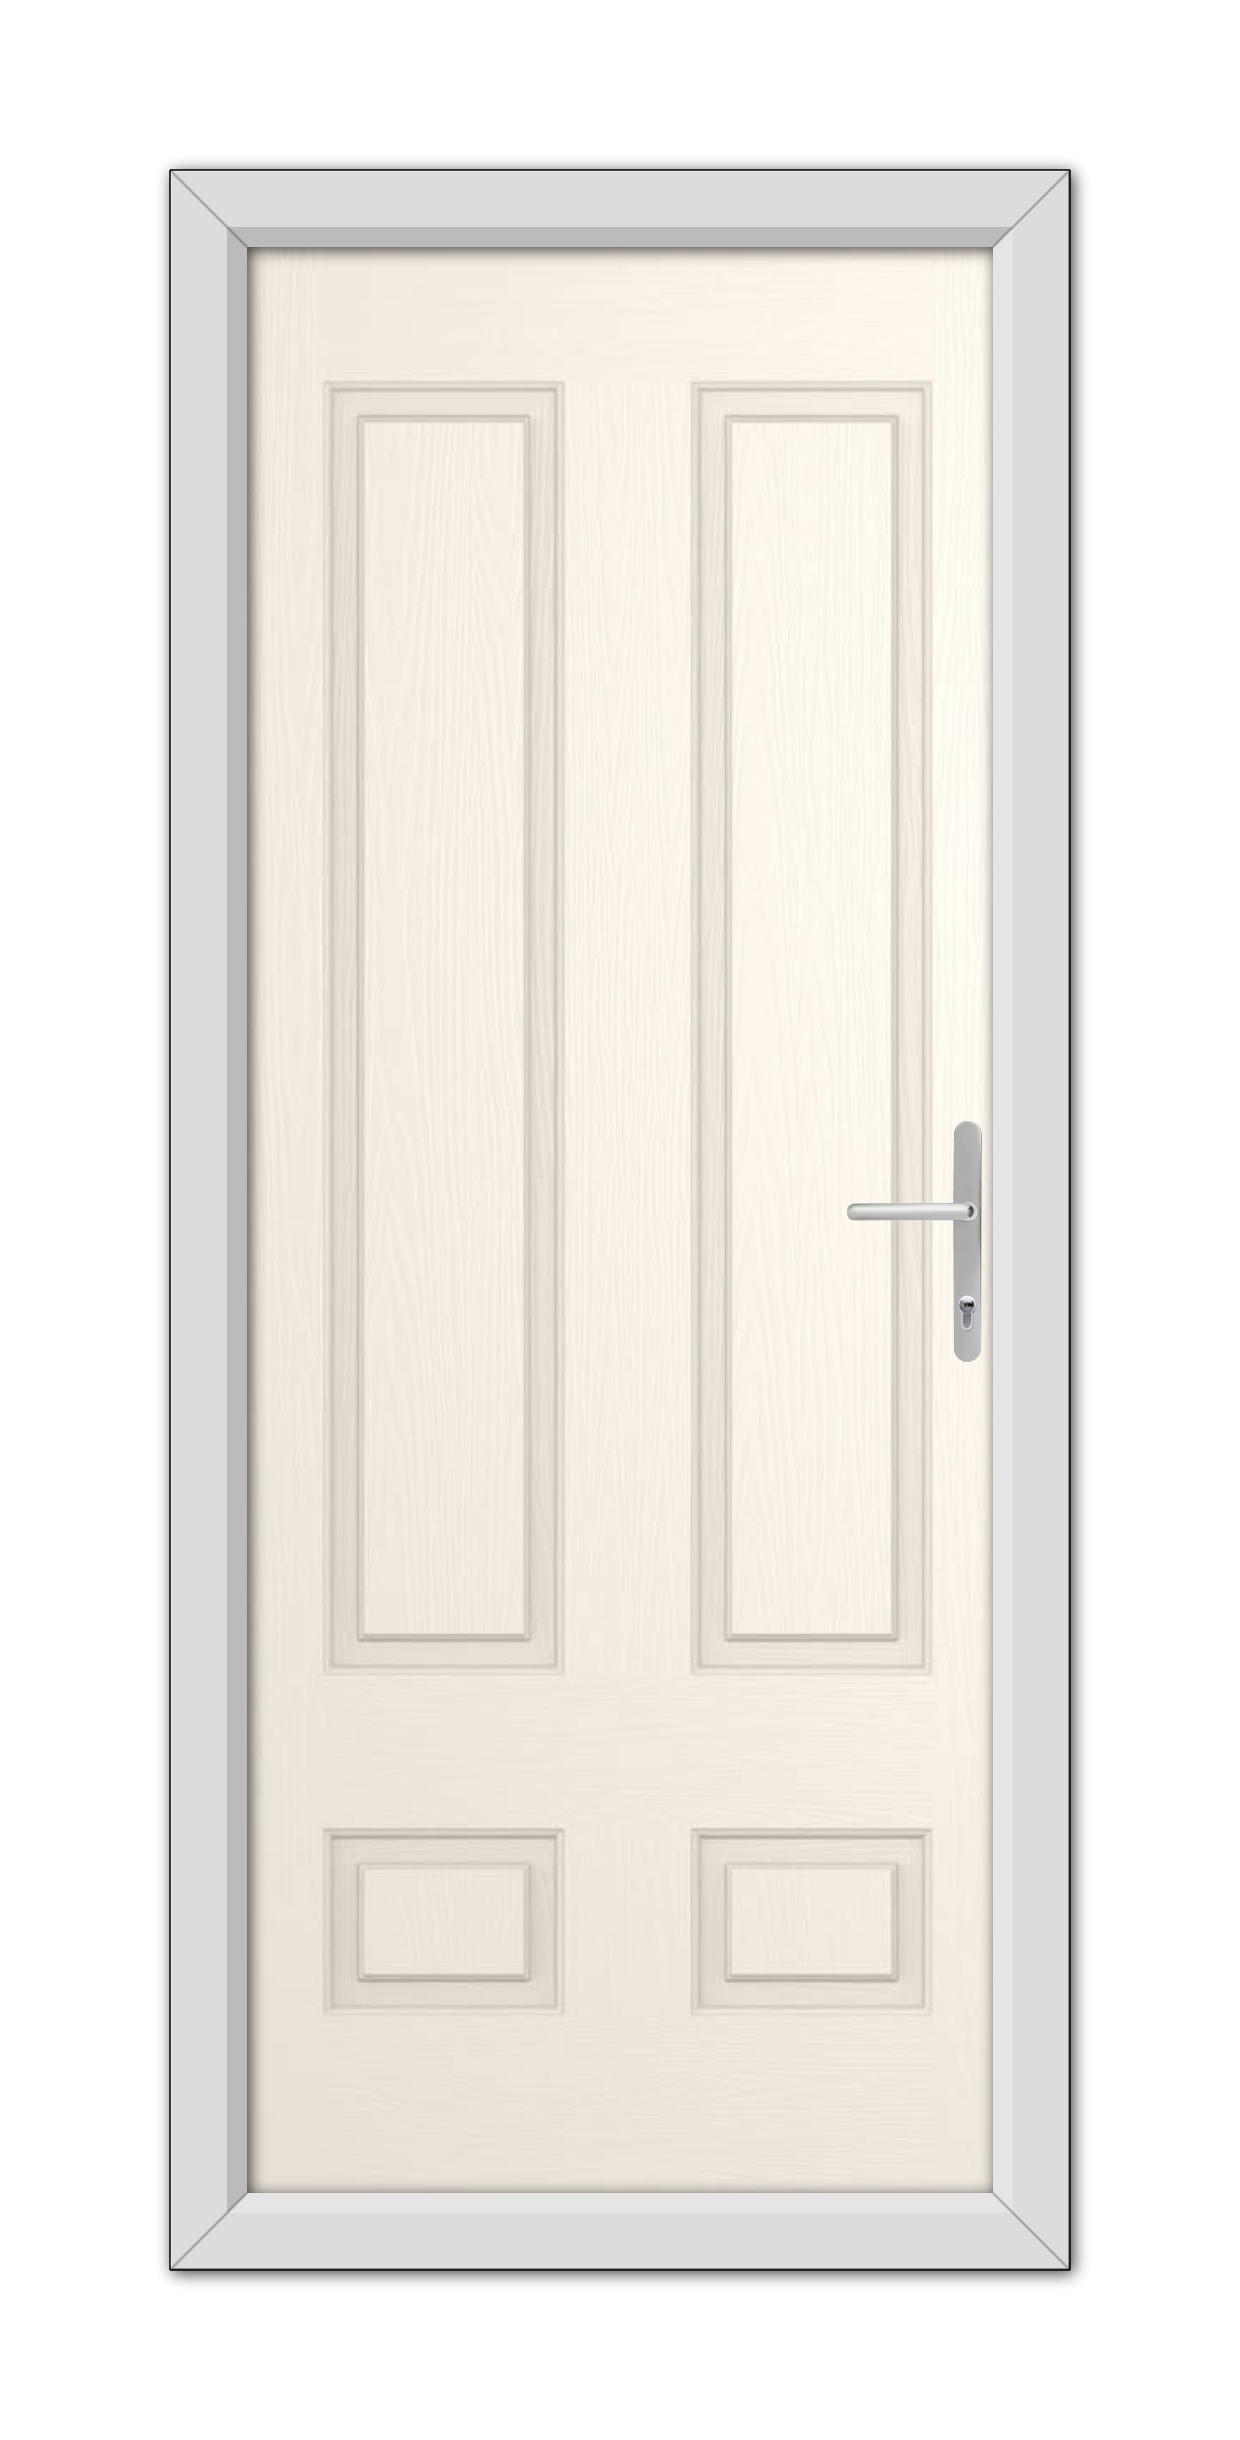 Double White Foil Aston Solid Composite Door 48mm Timber Core with a silver handle, surrounded by a gray frame, depicted against a white background.